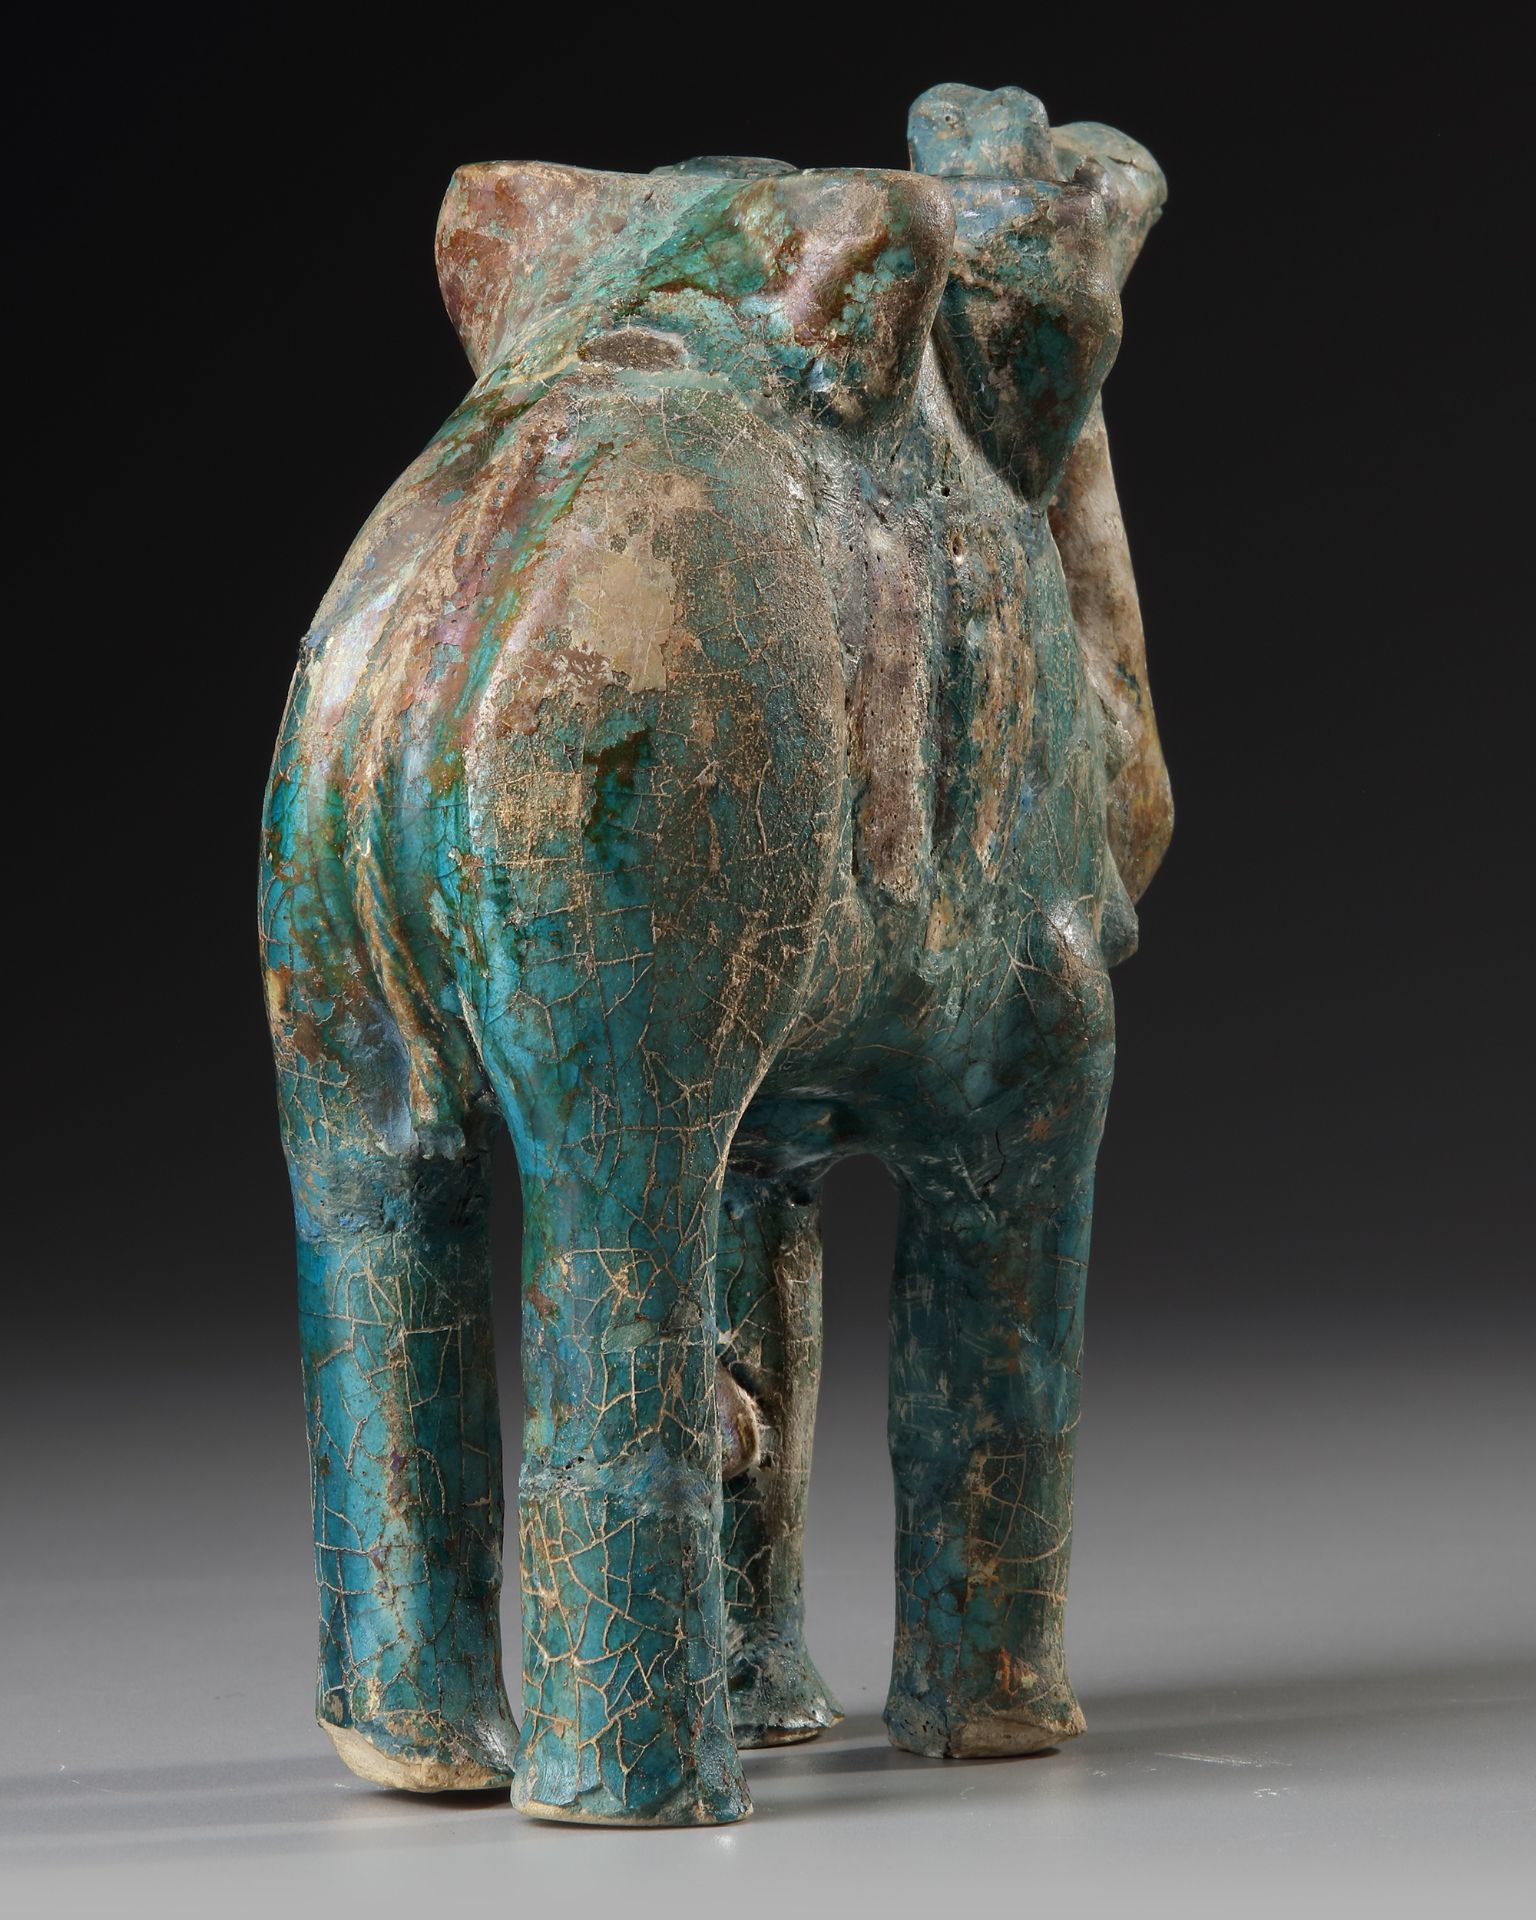 A TURQUOISE GLAZED POTTERY FIGURE OF A CAMEL, KASHAN, PERSIA, 11TH-12TH CENTURY - Image 4 of 4